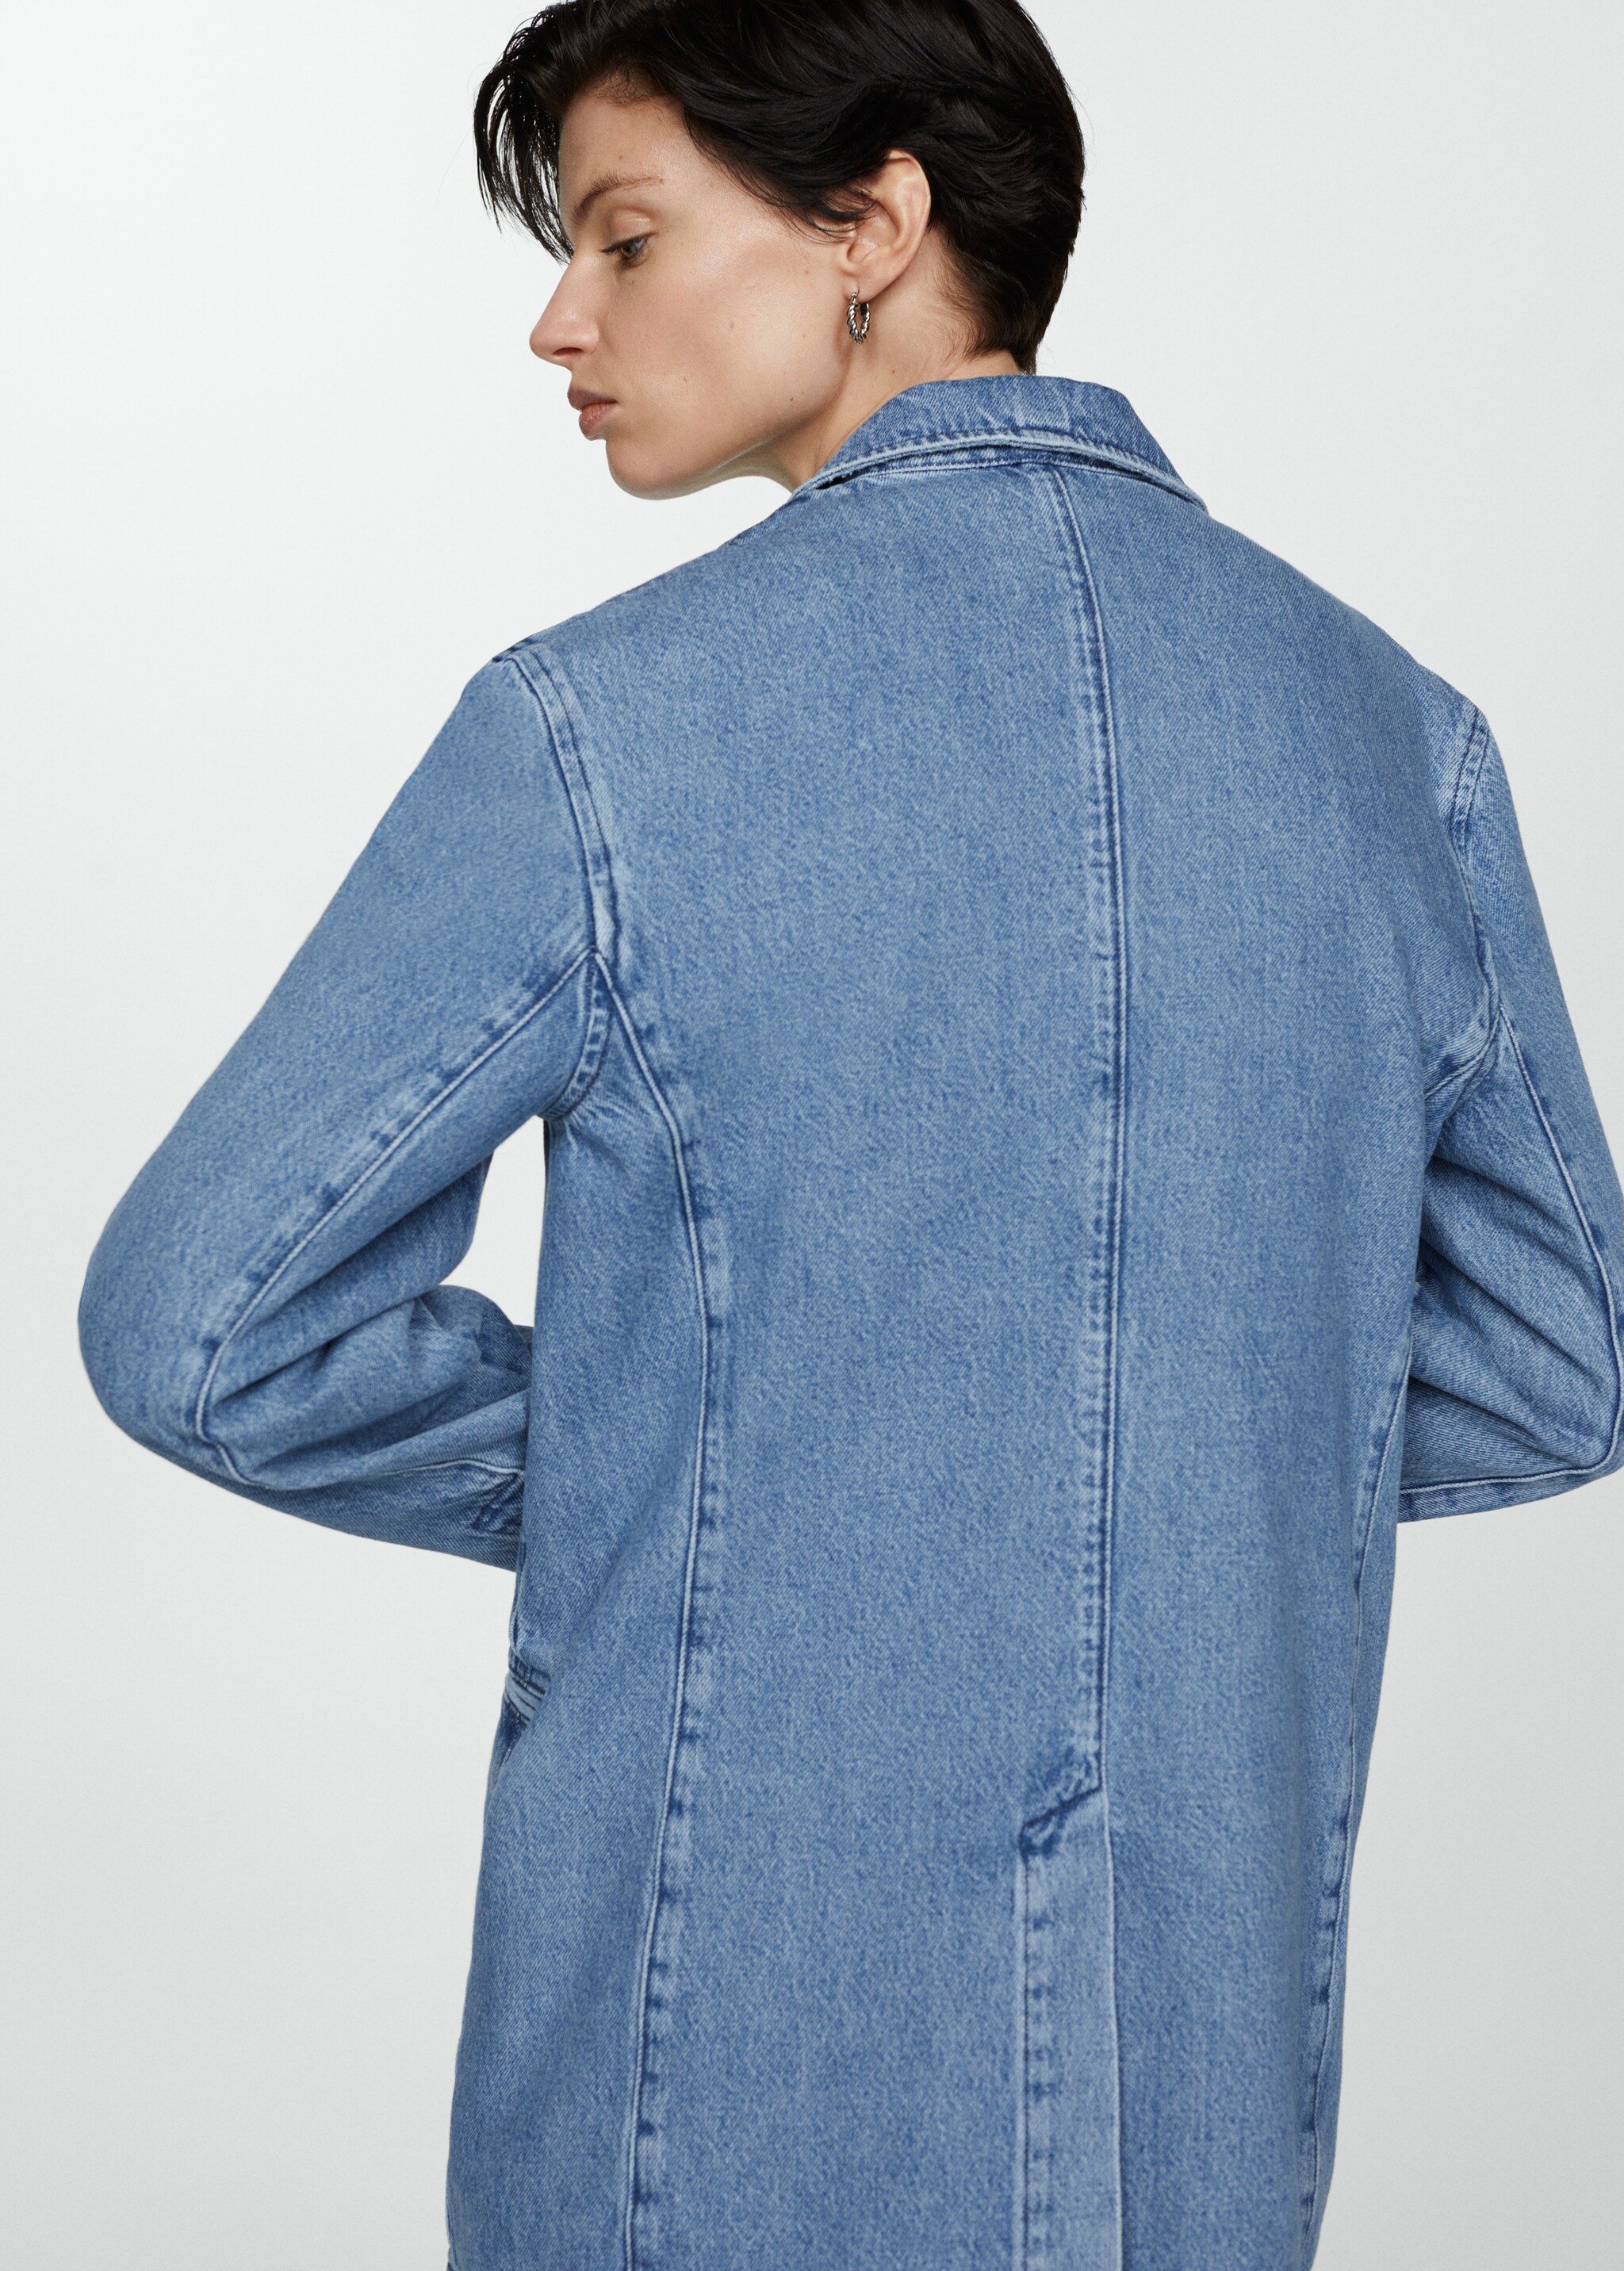 Denim jacket with buttons - Reverse of the article